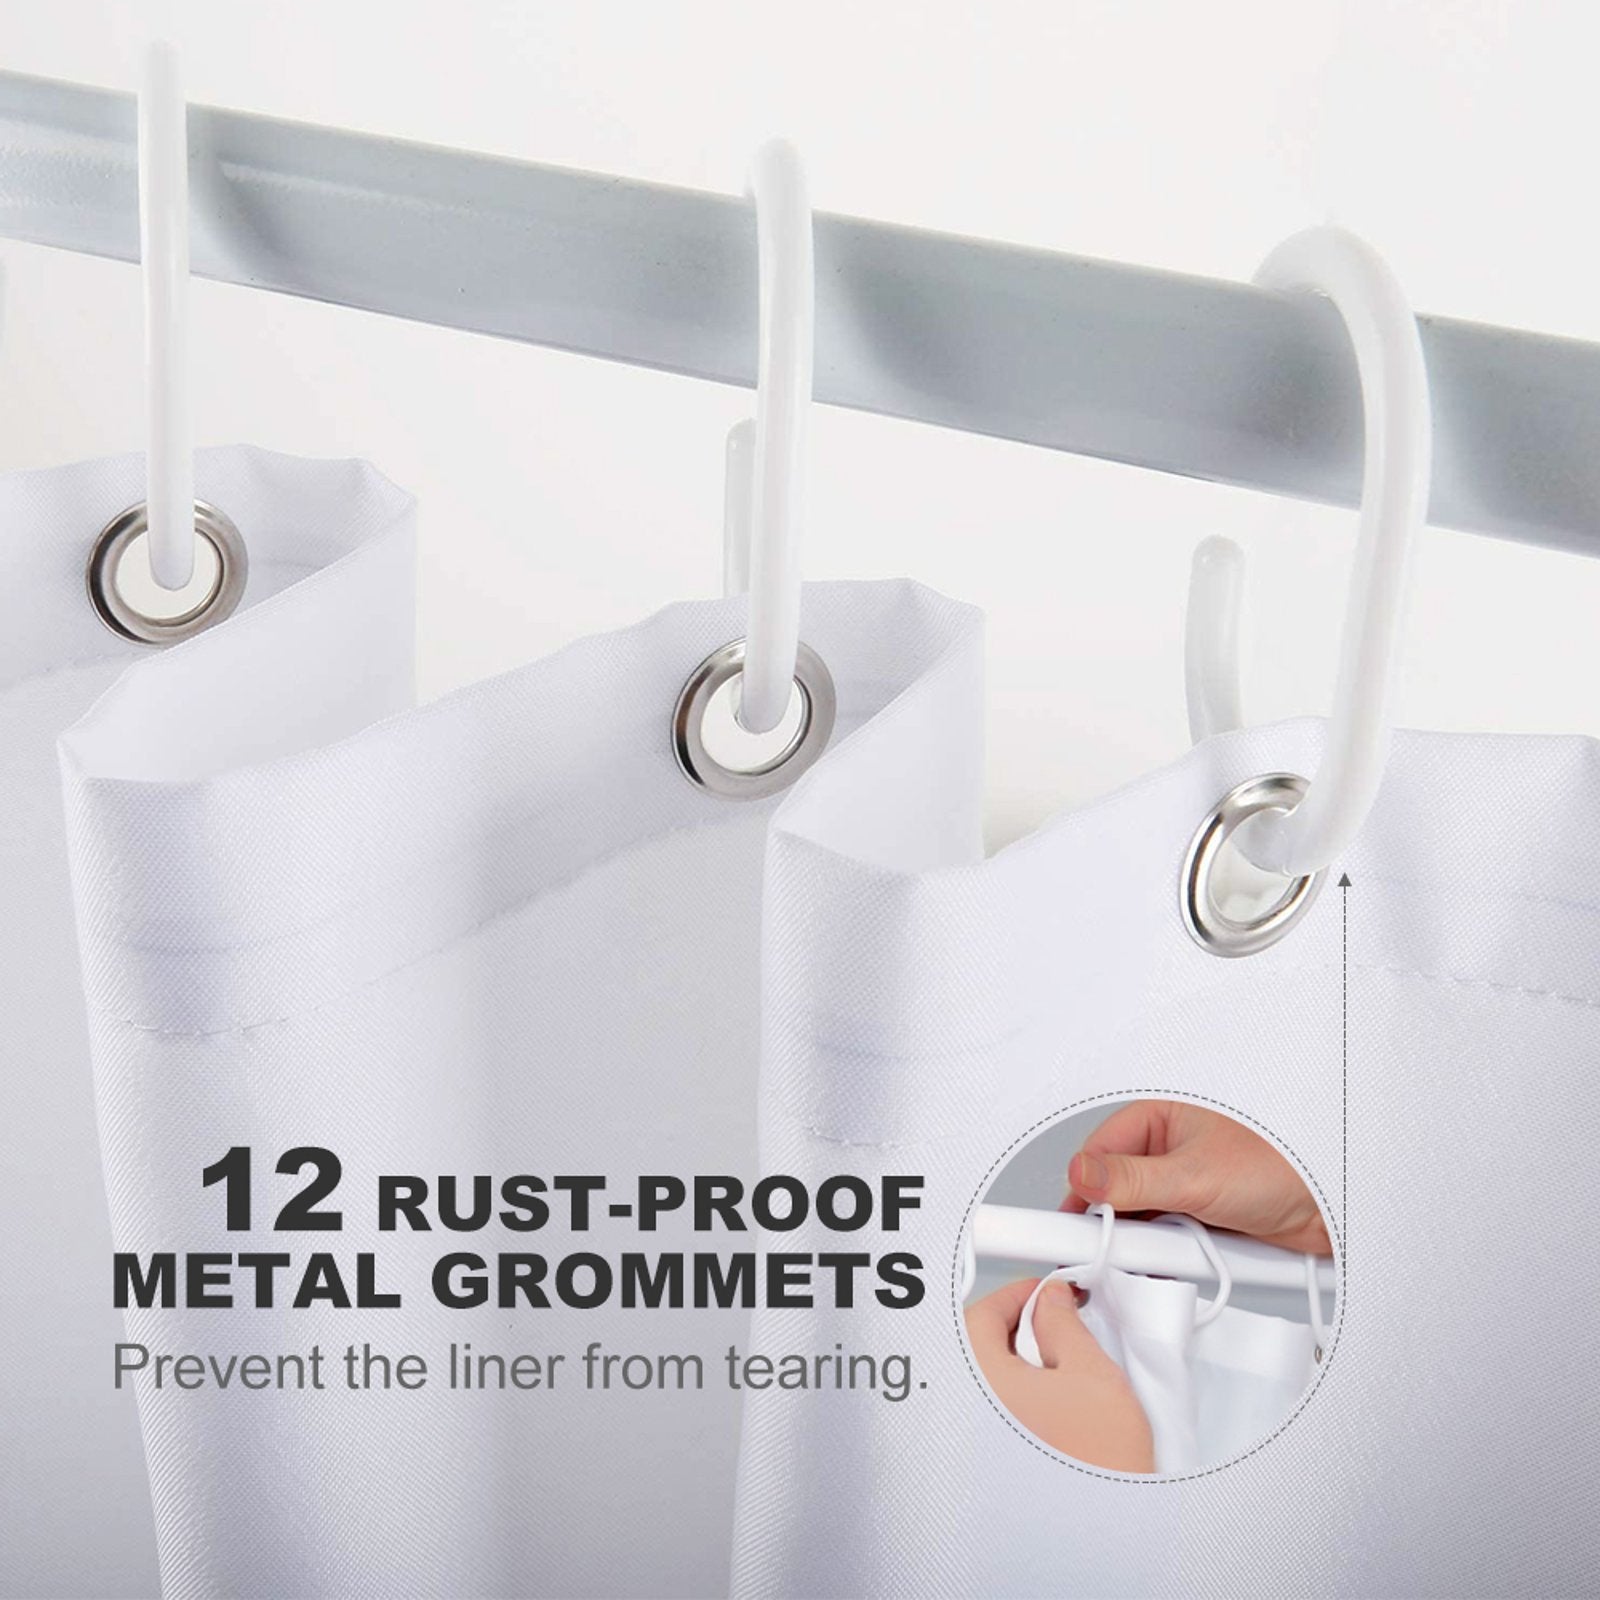 A Funny Cool Mouse Riding Cat Shower Curtain by Cotton Cat made from high-quality polyester fabric with 12 rust-proof metal grommets is displayed, along with a close-up showing hands installing the liner. Text on the image reads, "12 Rust-Proof Metal Grommets. Prevent the liner from tearing.